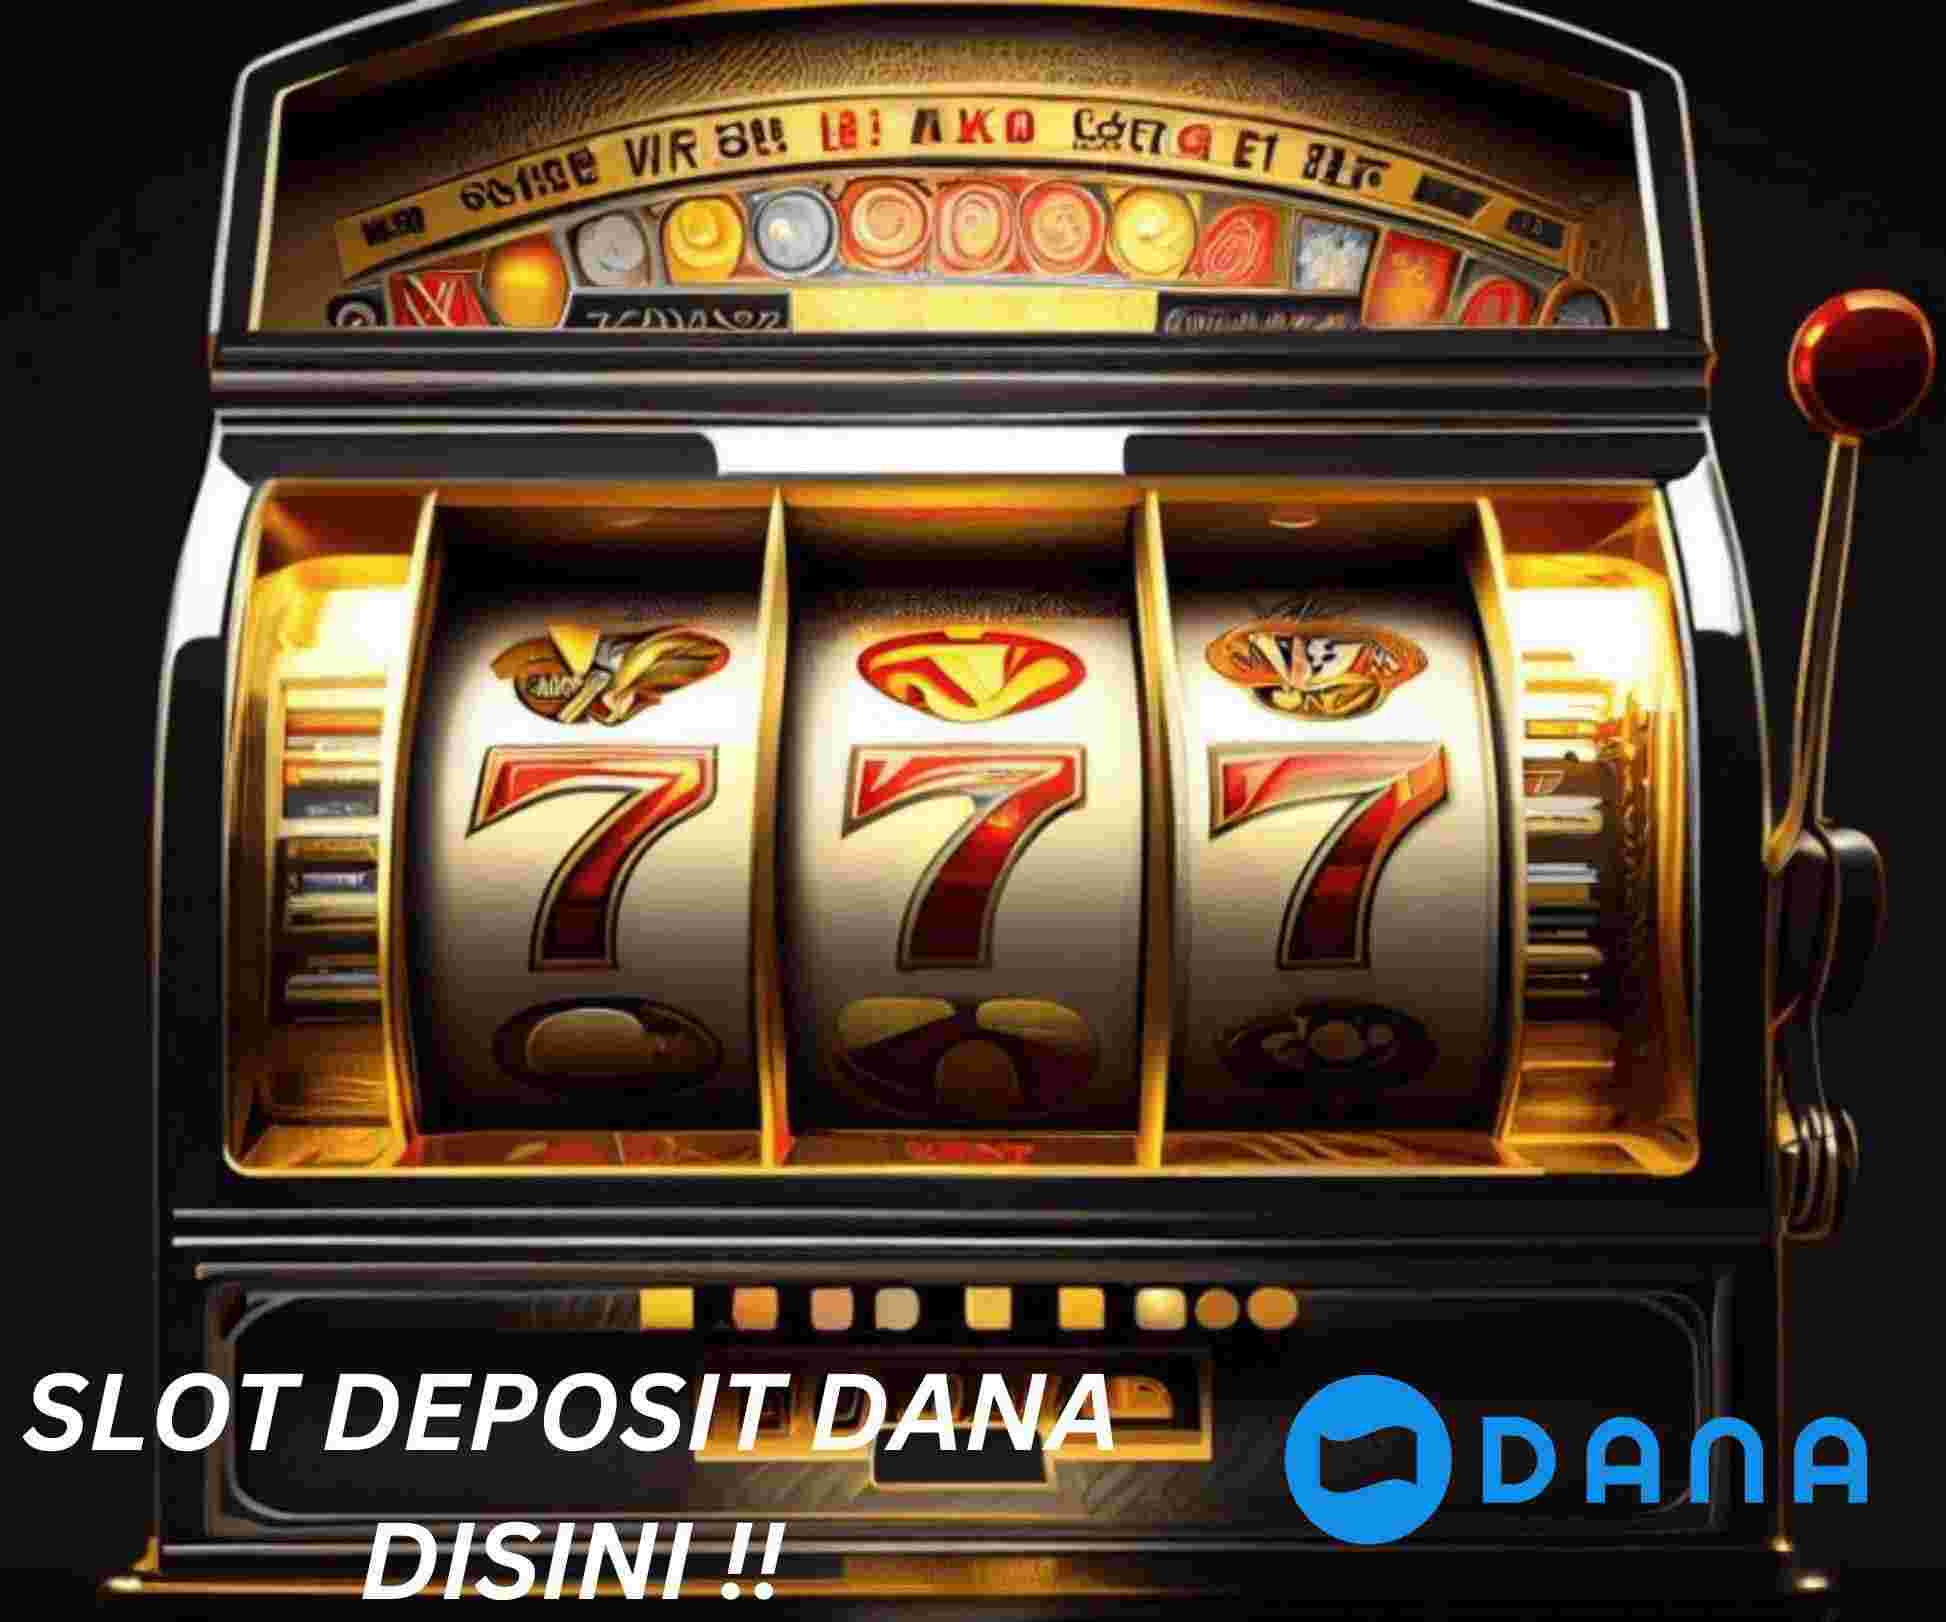 Slot dana have mushroomed on almost all Indonesian online sites